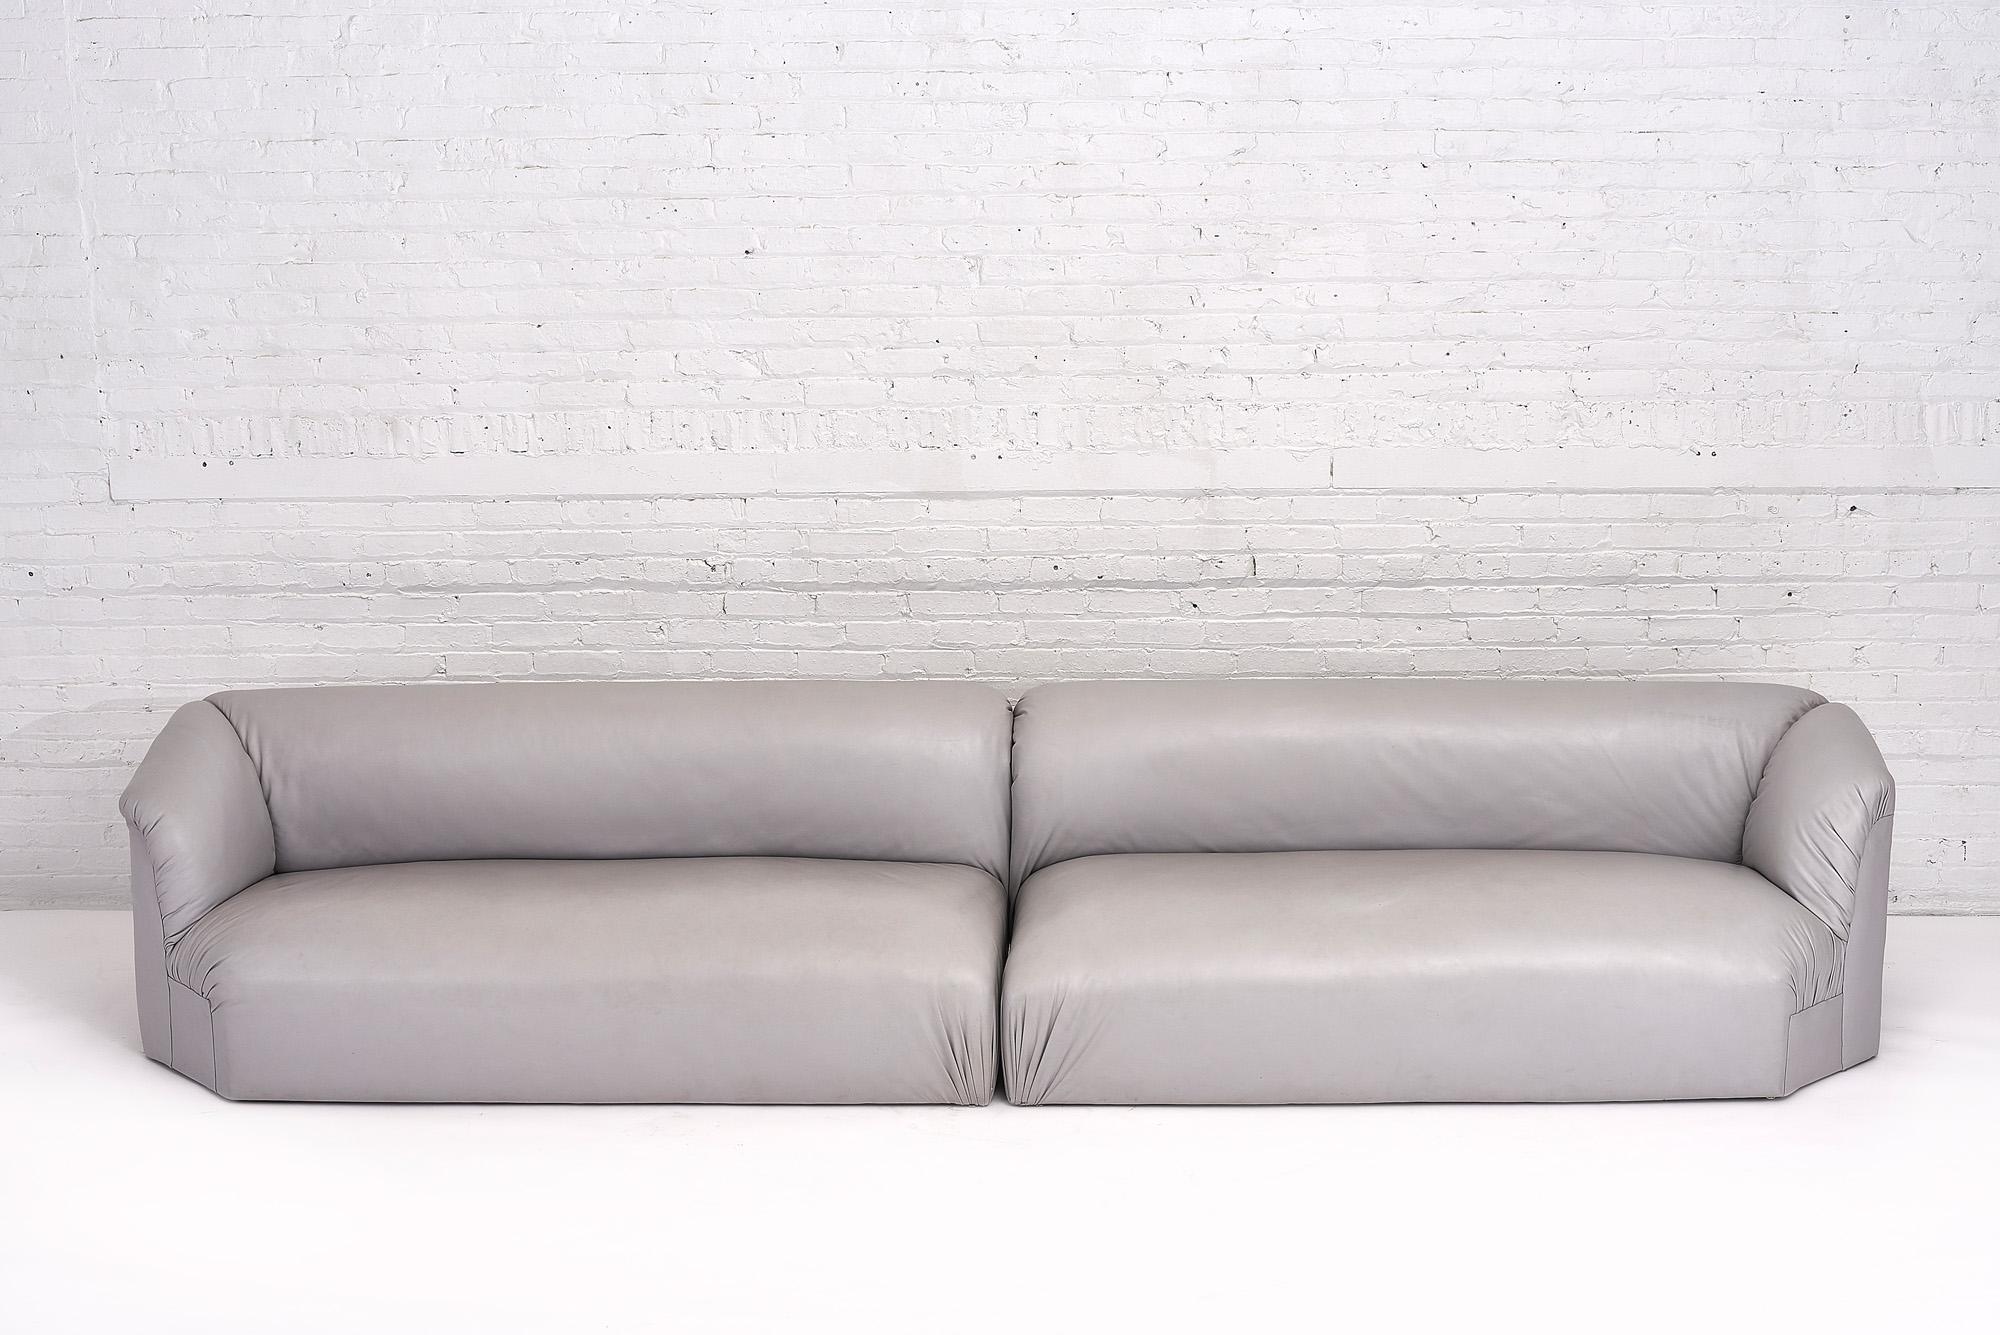 Postmodern 2 piece gray leather sectional sofas. 2 Piece modular sofa can be used as shown or used in a corner. High quality supple and smooth grey leather.